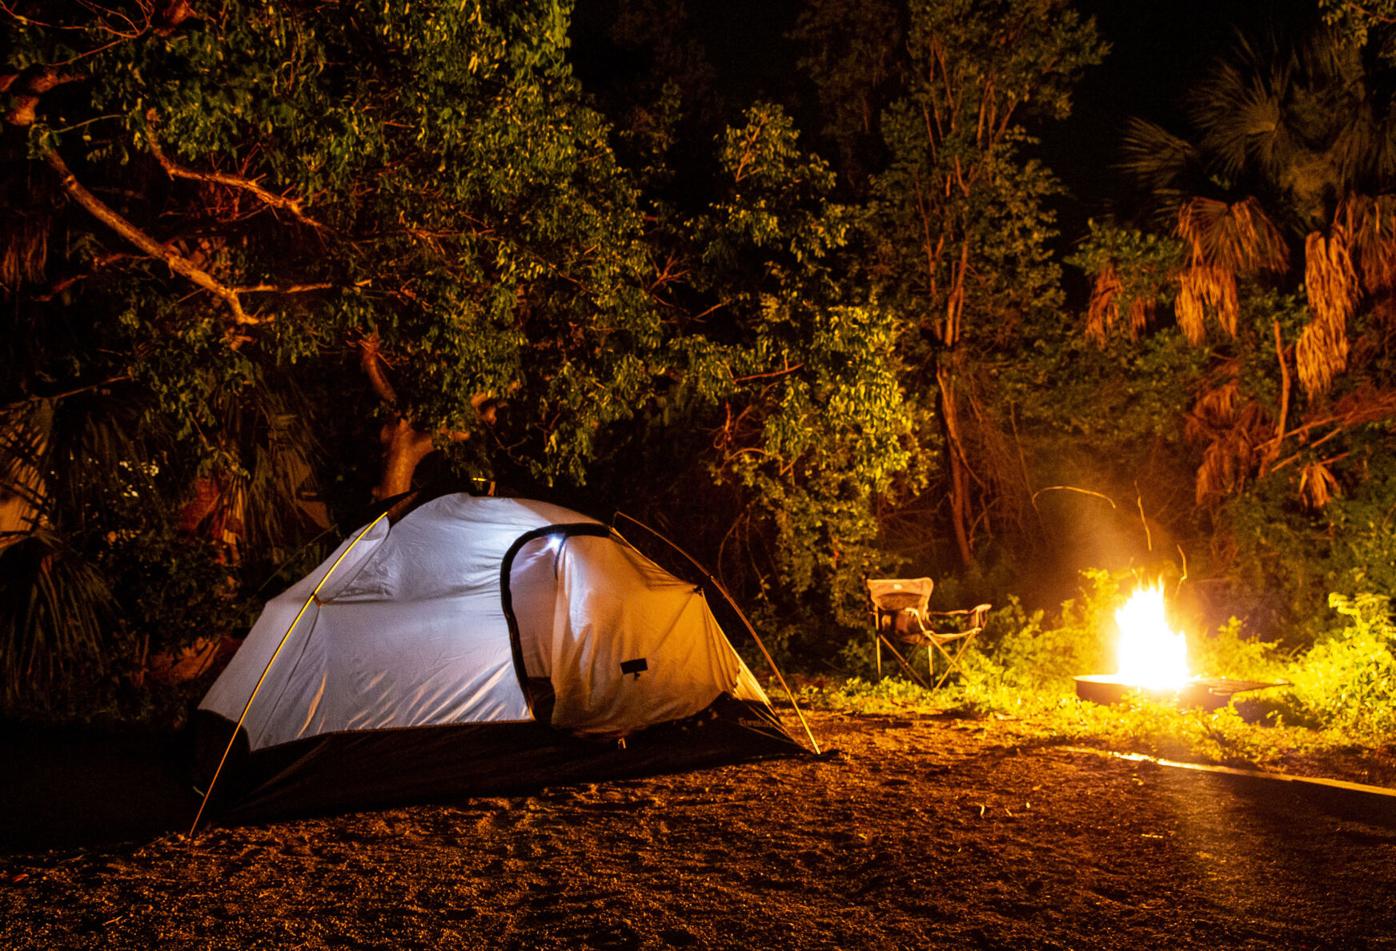 Everyone wants to get outside': boom in camping as Americans escape after  months at home, US news